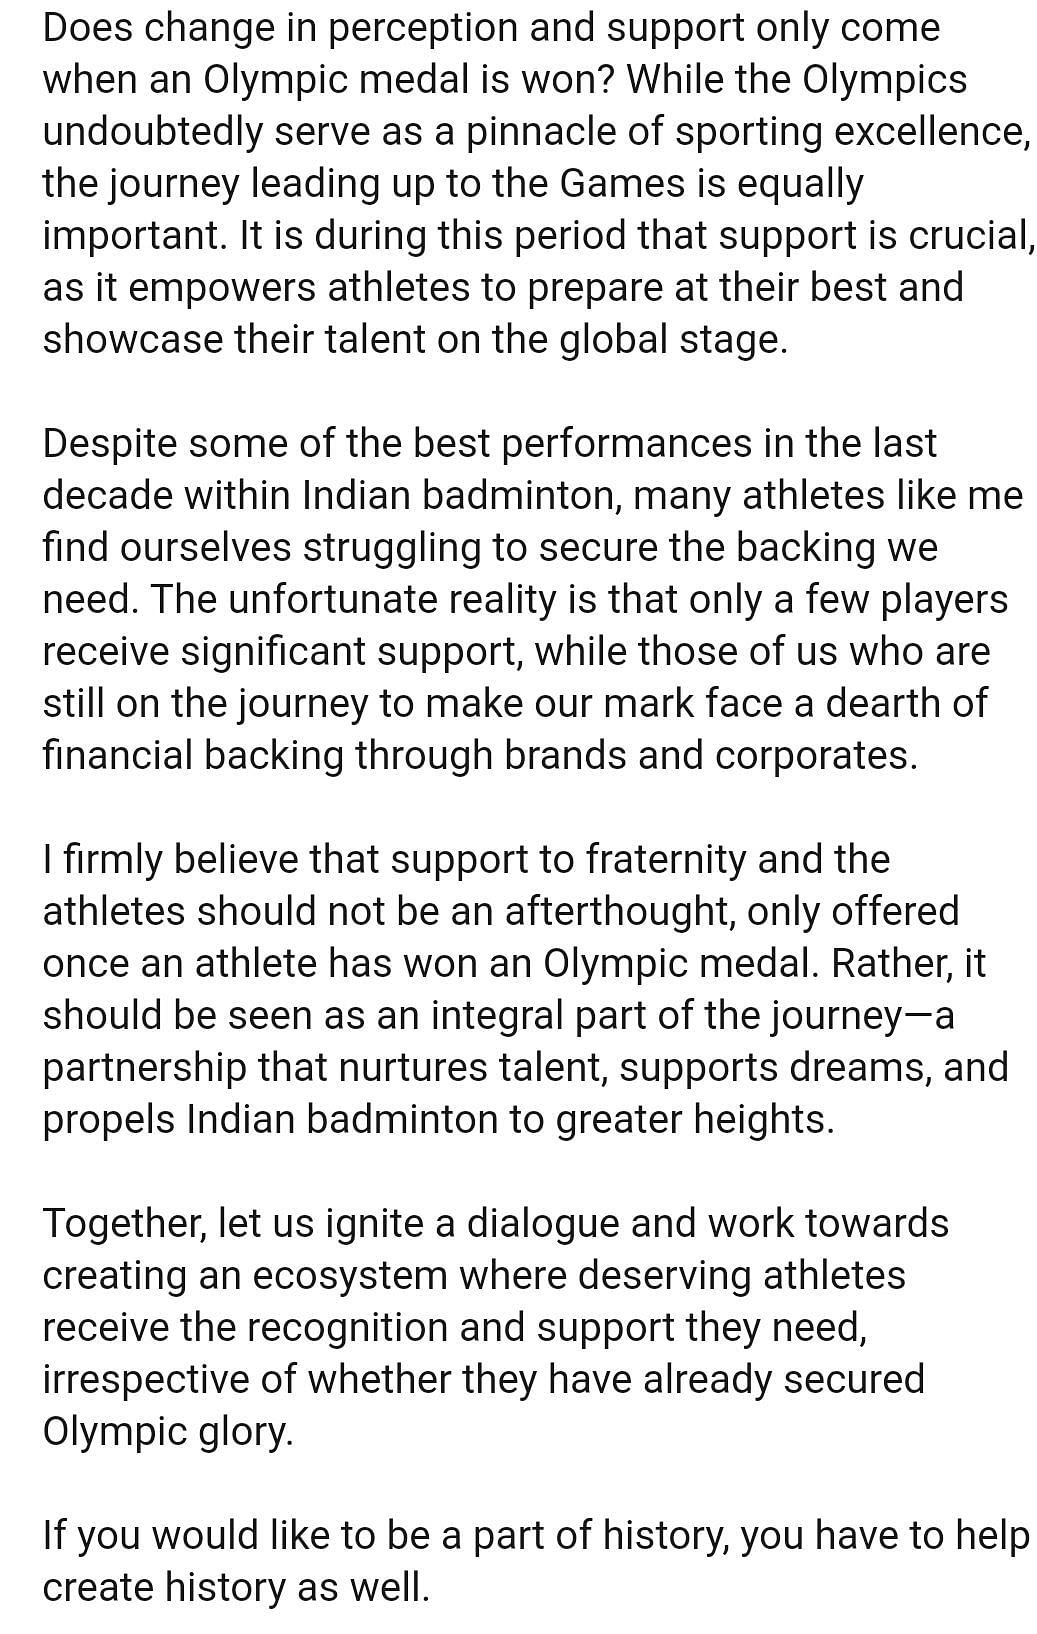 Rest of the message from HS Prannoy